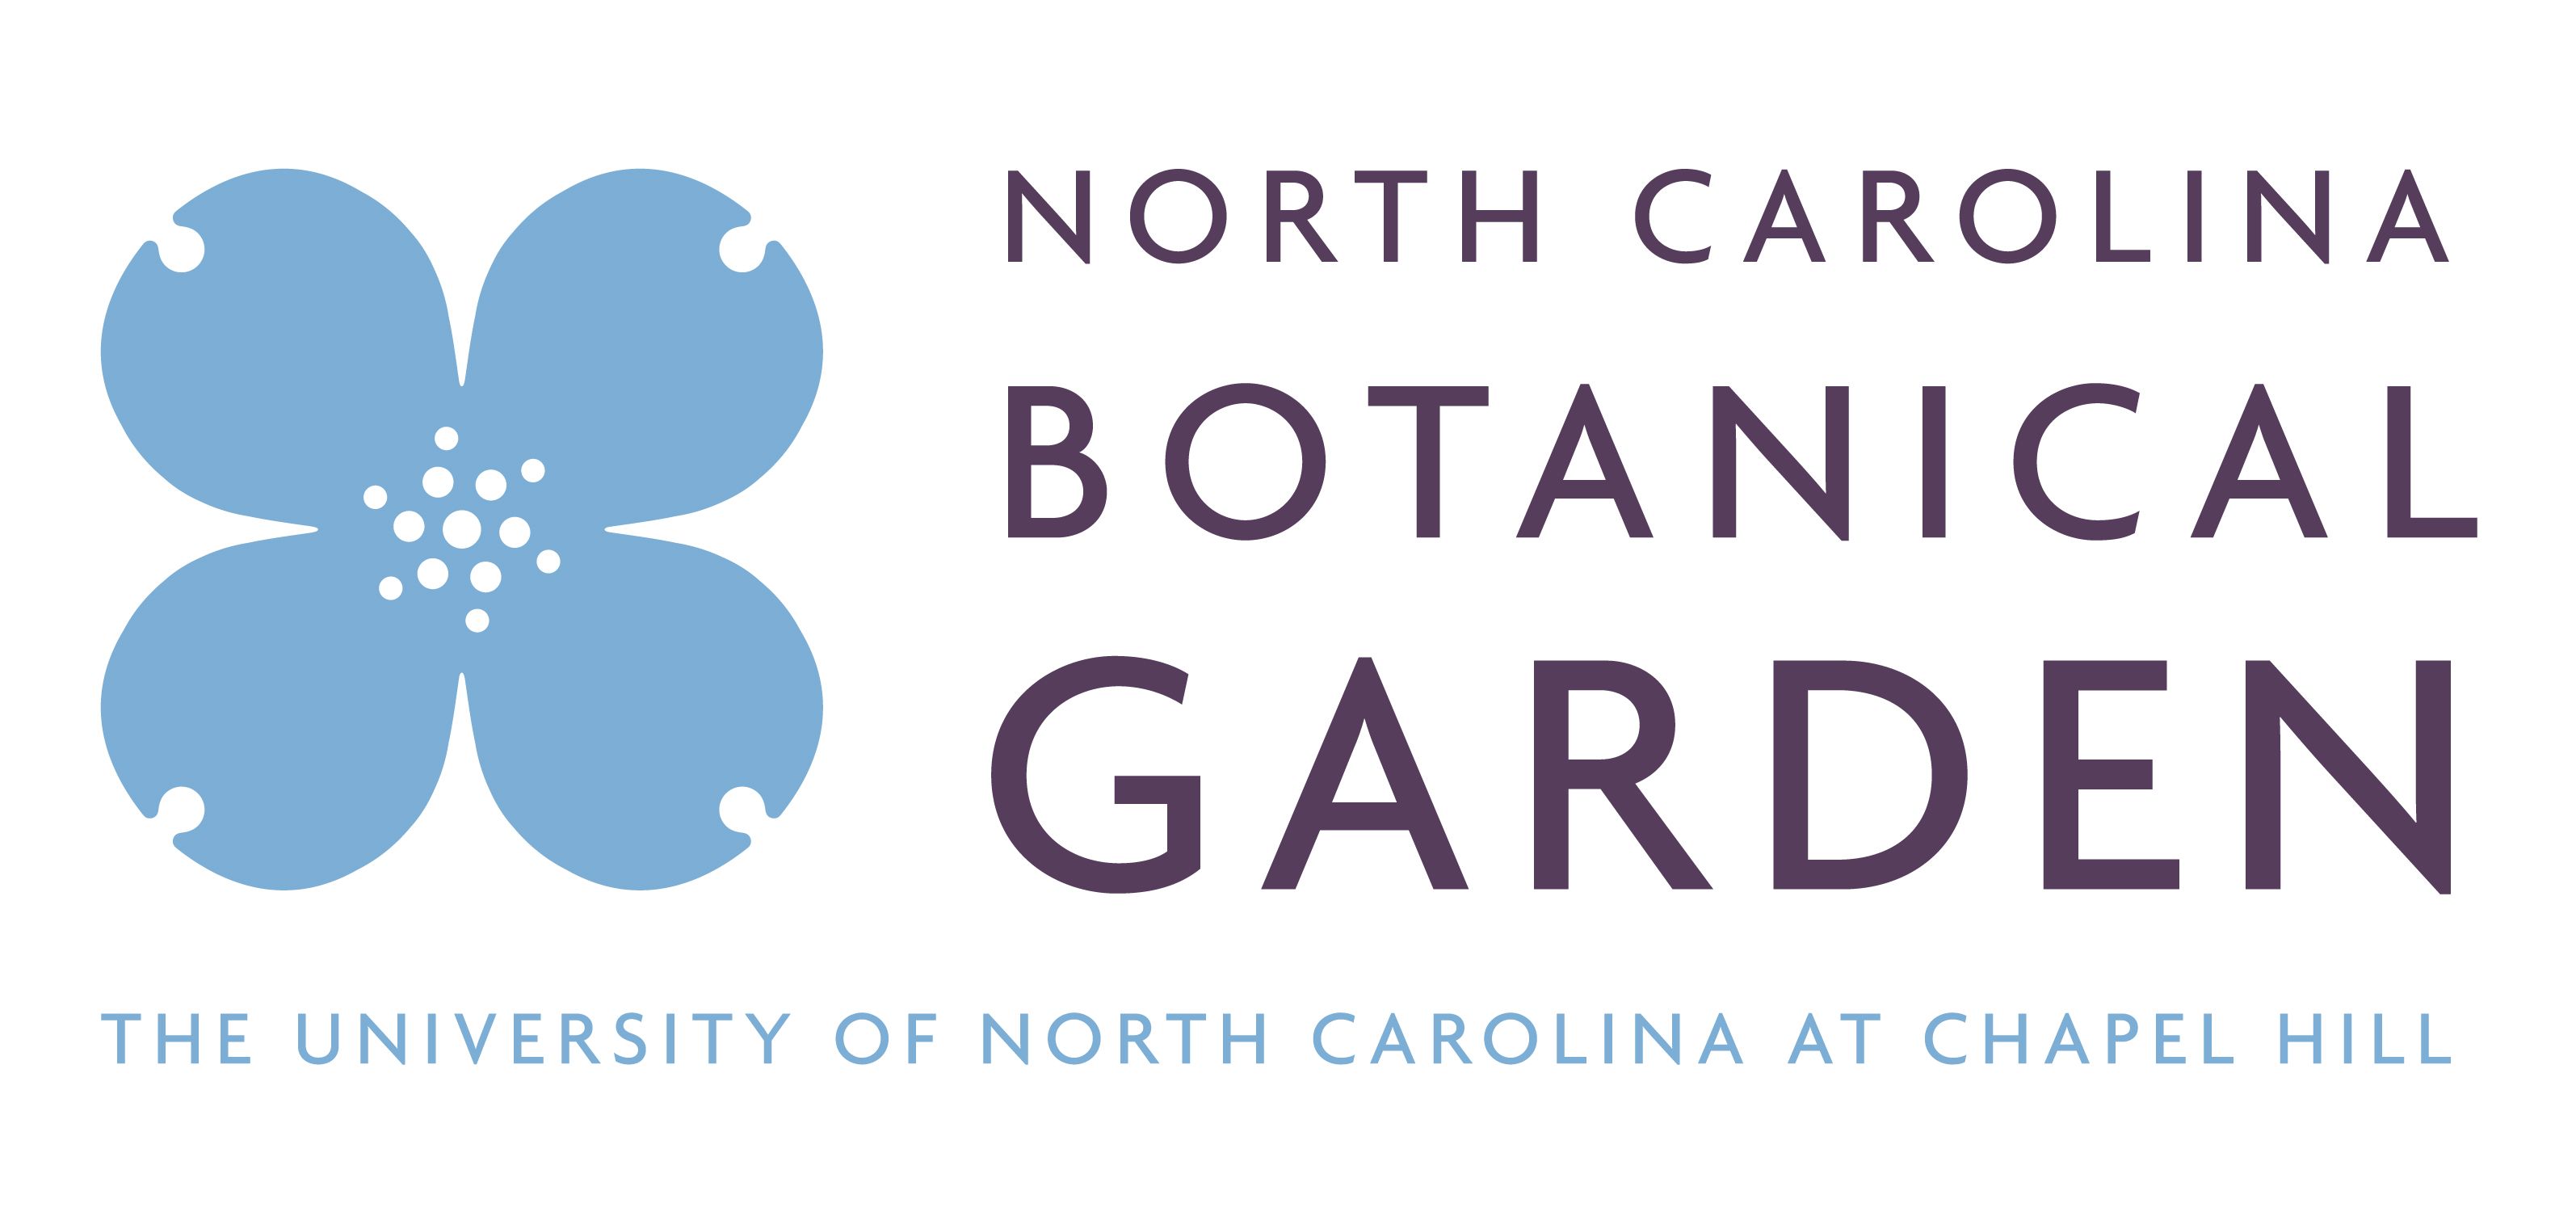 North Carolina Botanical Garden seeks a Facility and Events Manager